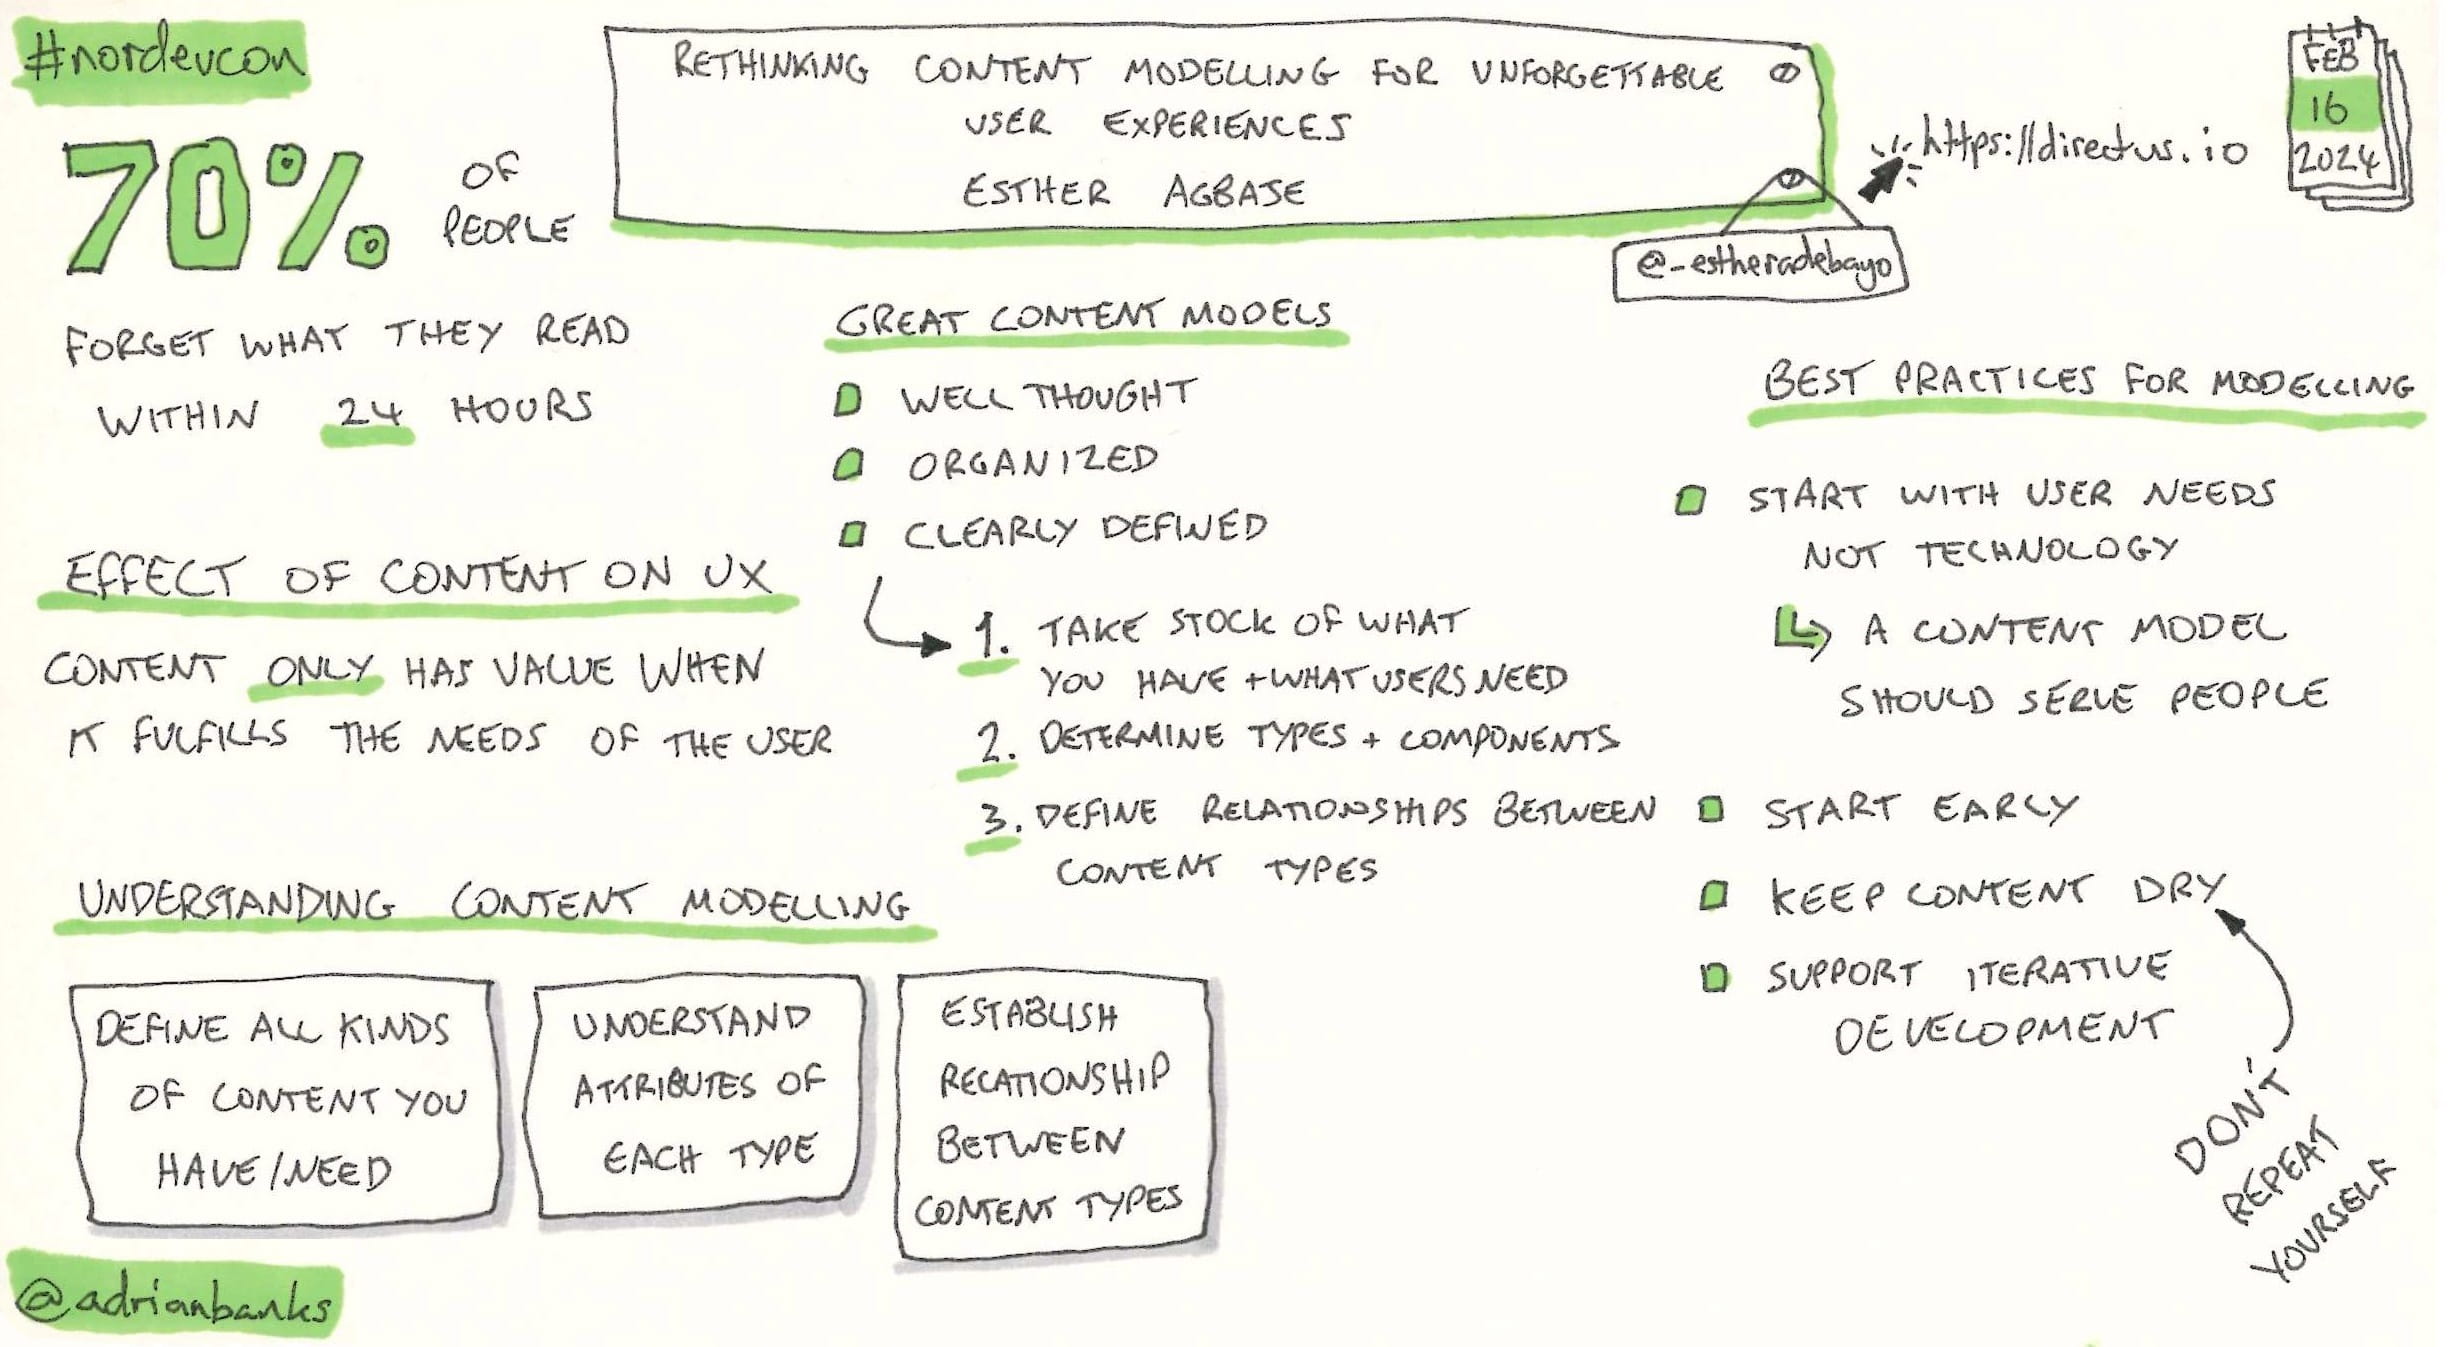 Rethinking Content Modelling For Unfogettable User Experiences by Esther Agbaje